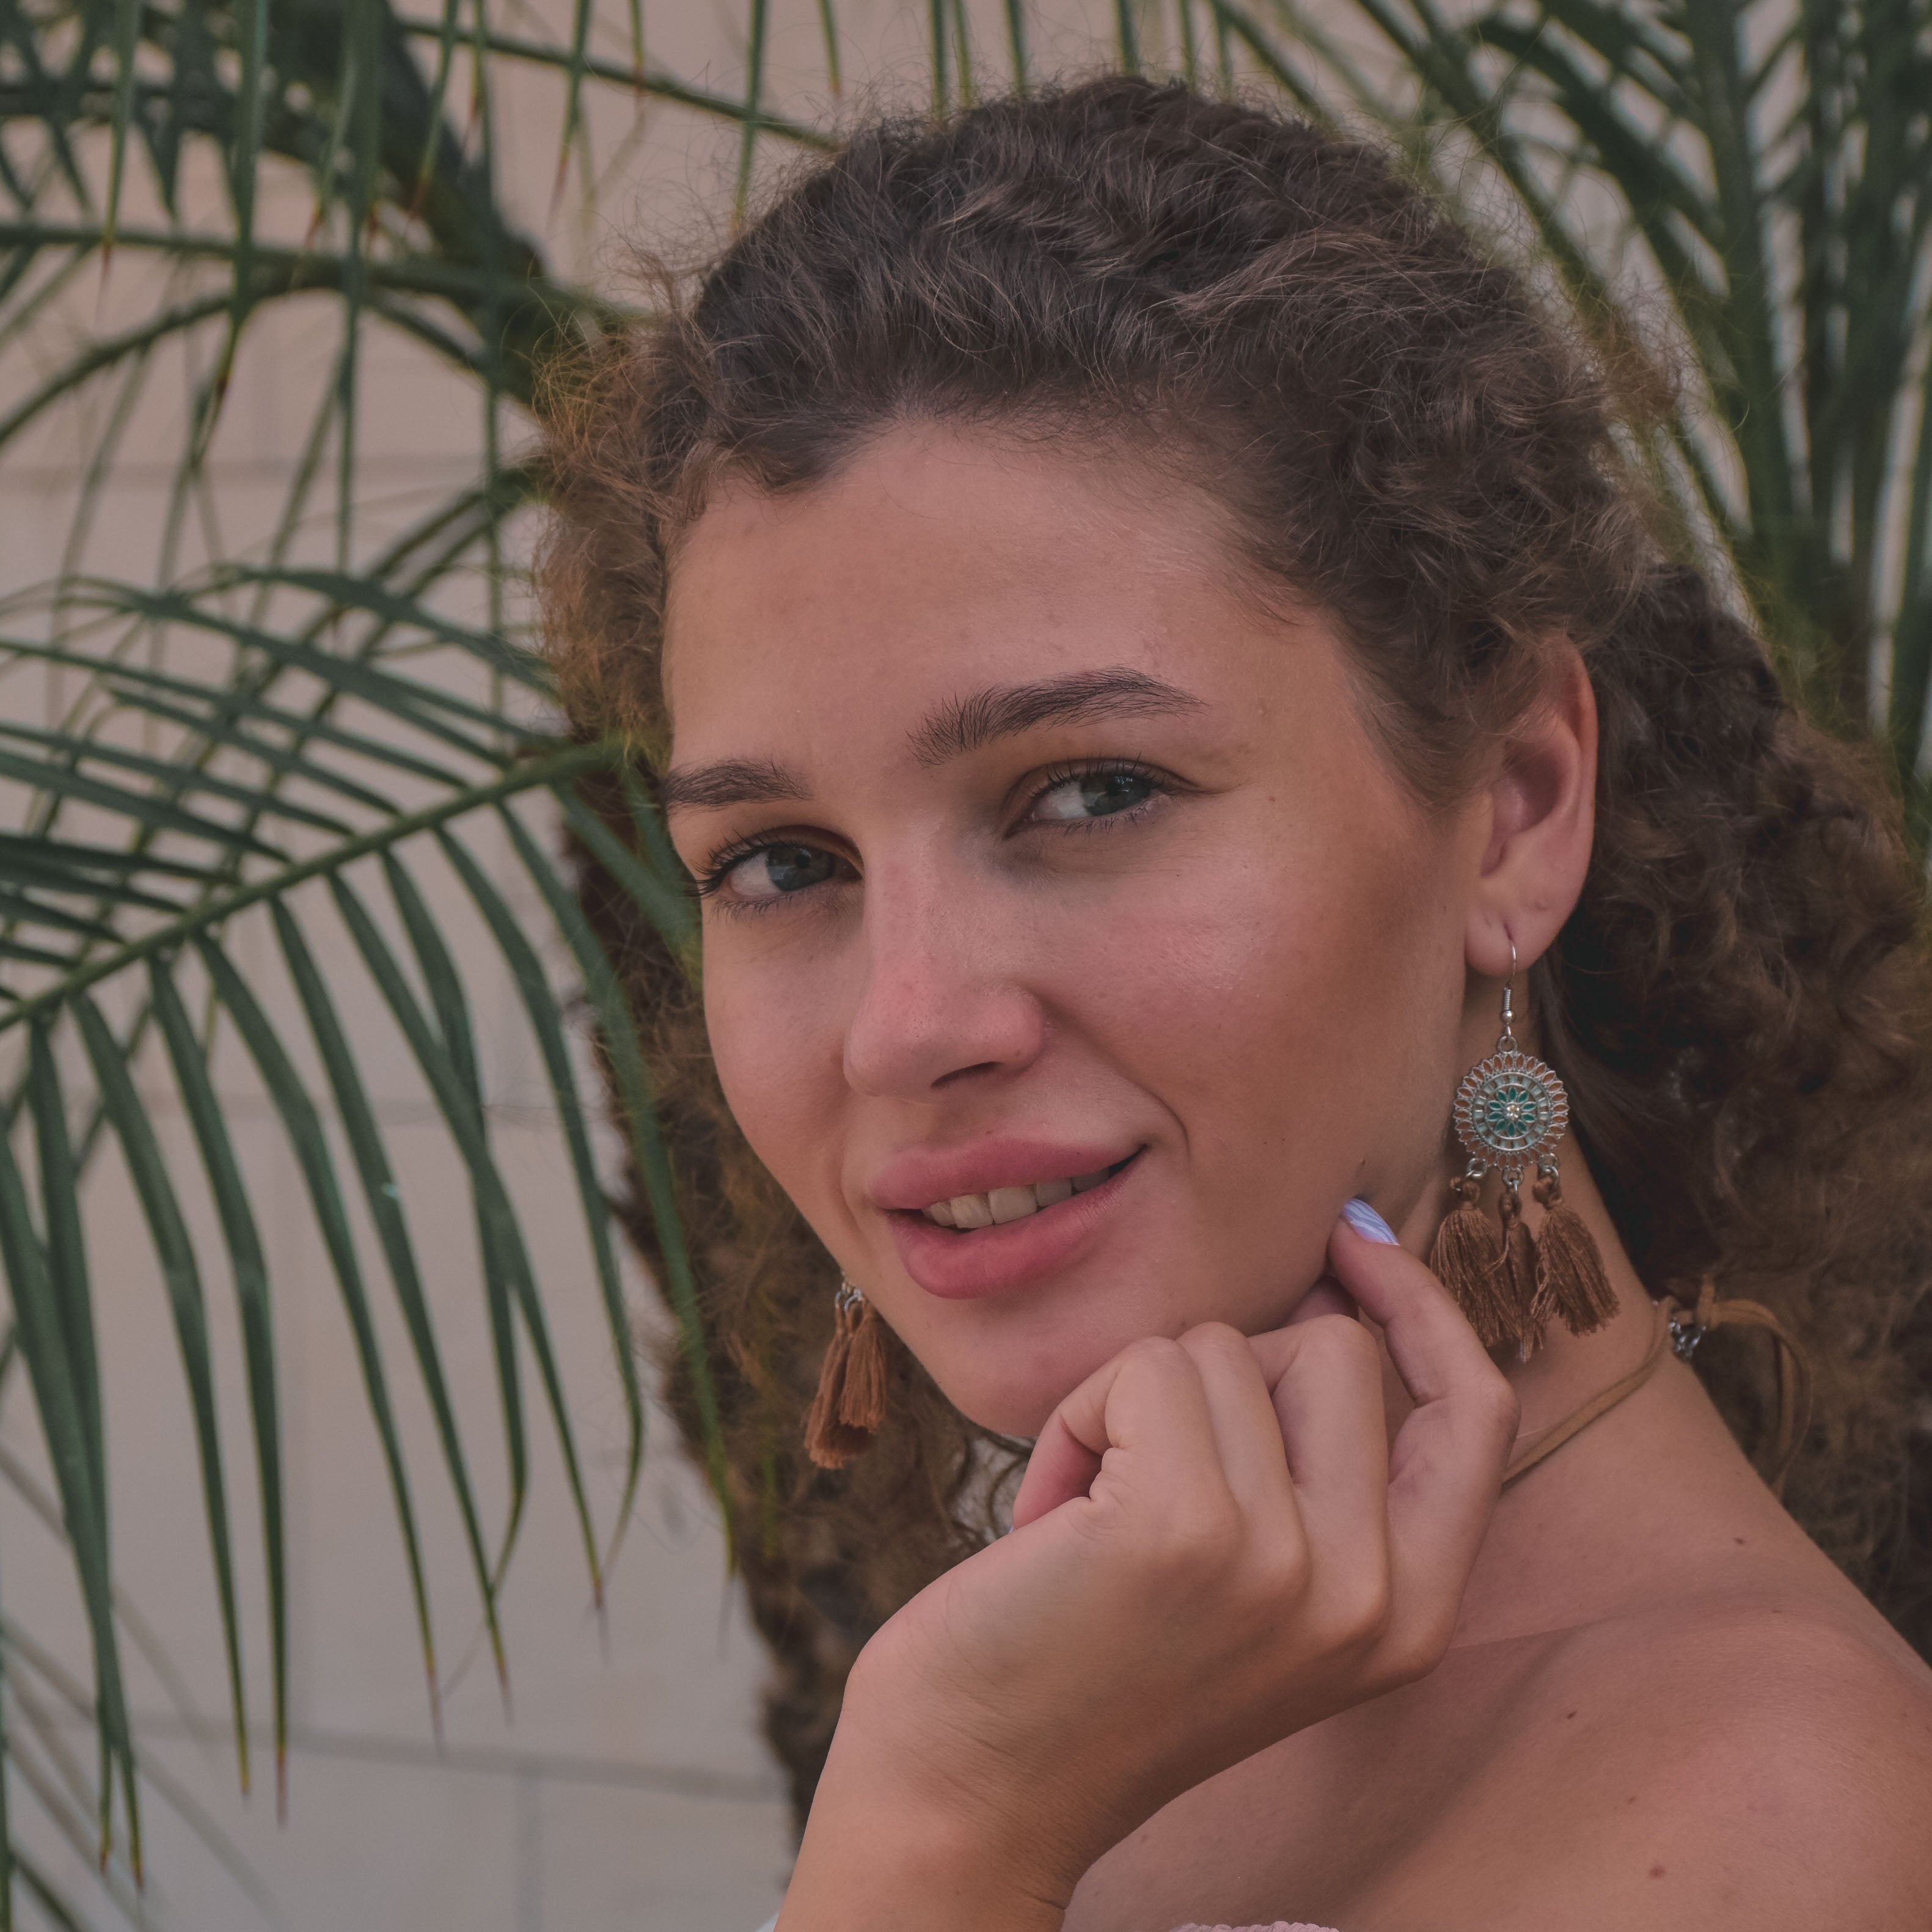 CABO EARRINGS Elepanta Earrings - Buy Today Elephant Pants Jewelry And Bohemian Clothes Handmade In Thailand Help To Save The Elephants FairTrade And Vegan